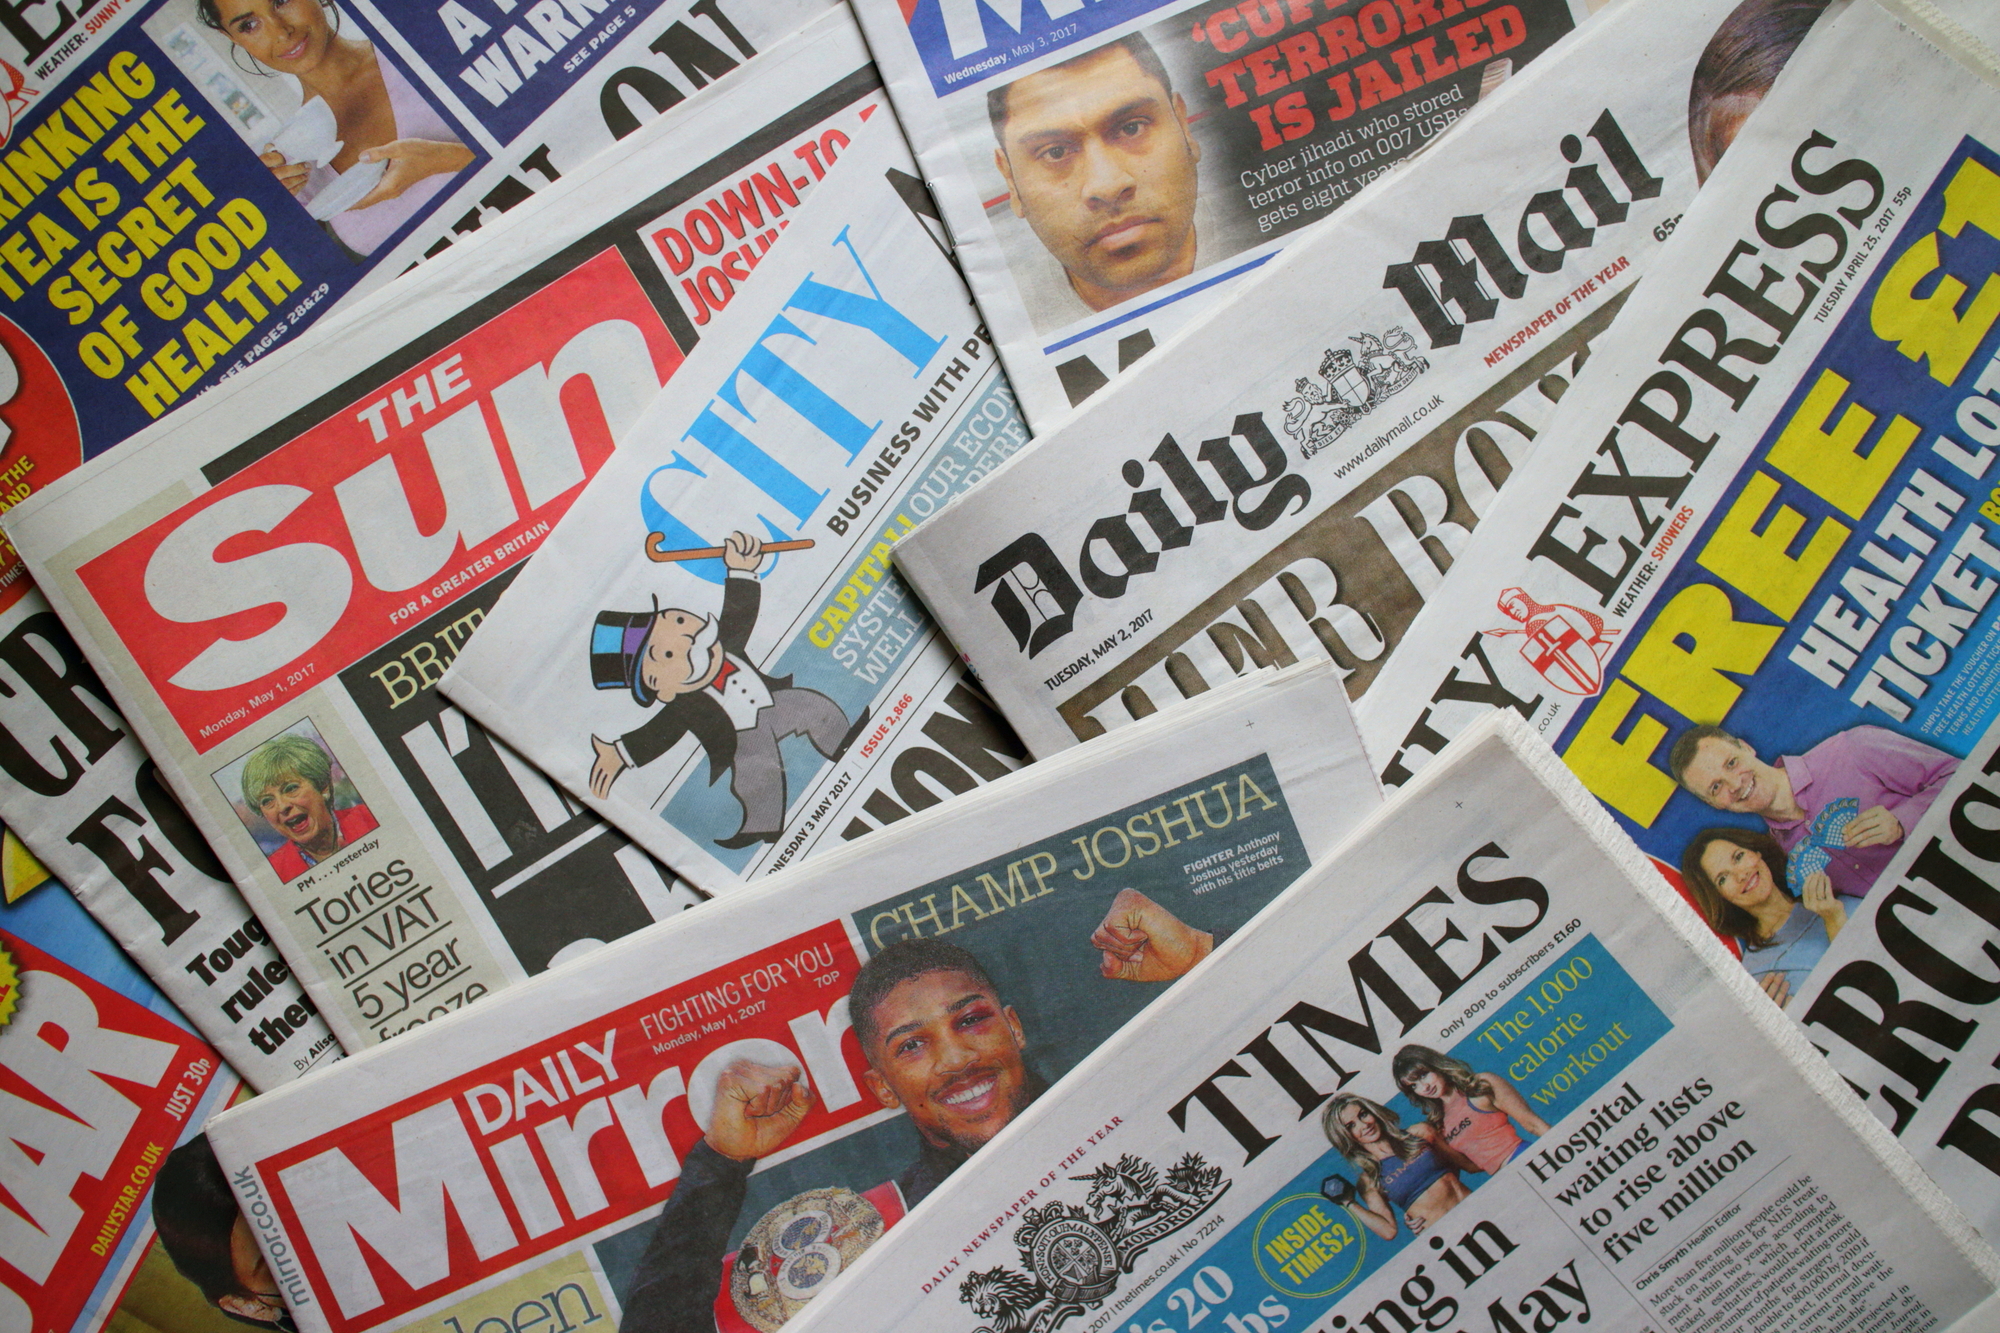 An image showing various front covers of British newspapers